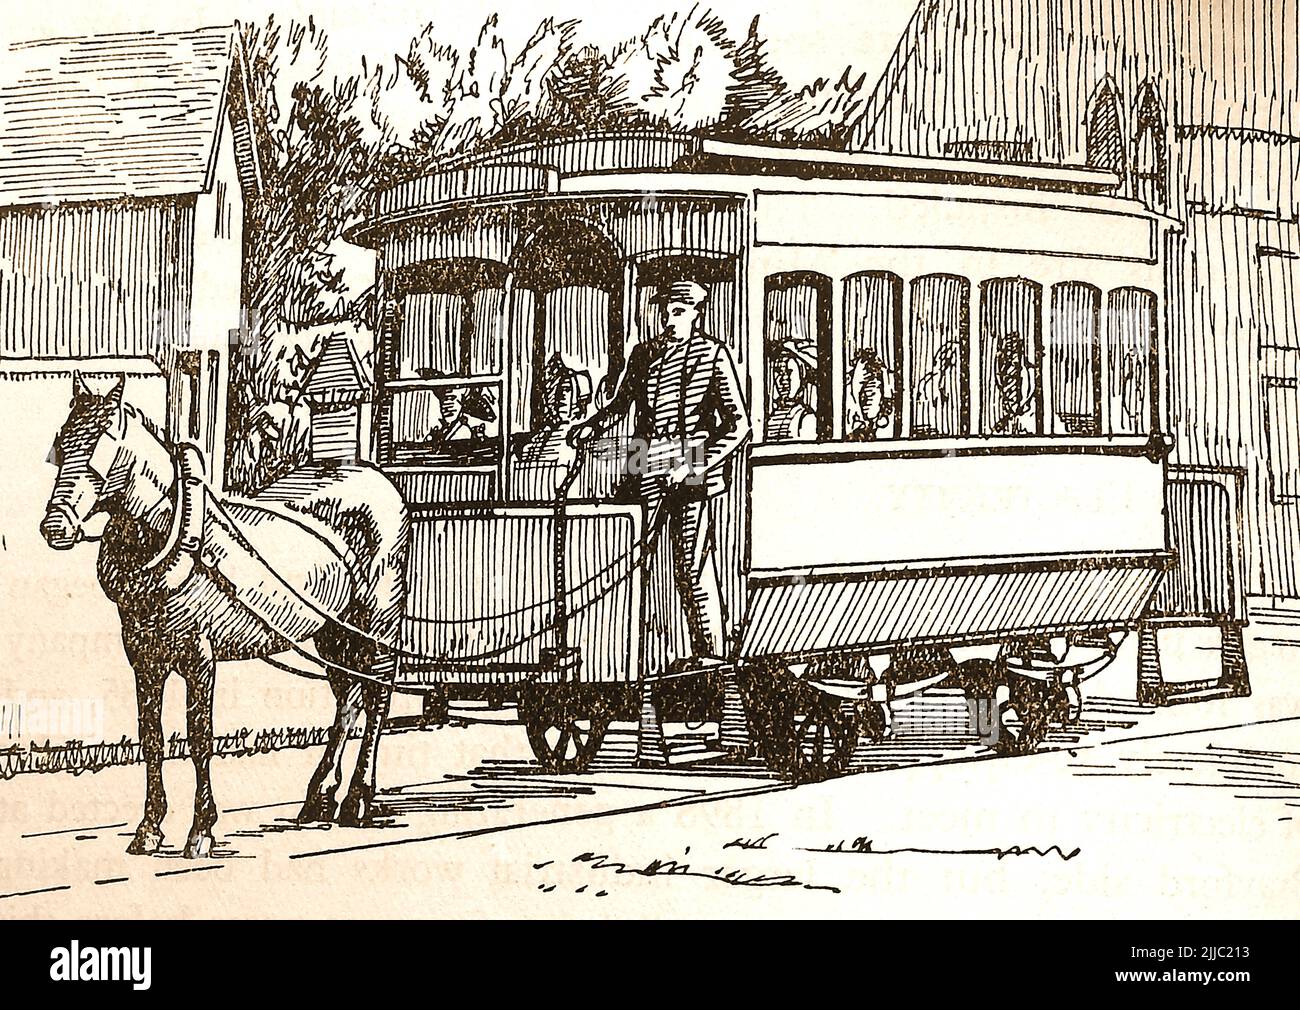 History of Lincoln, England  - A 1904 horse drawn tram in Lincoln, England. Stock Photo